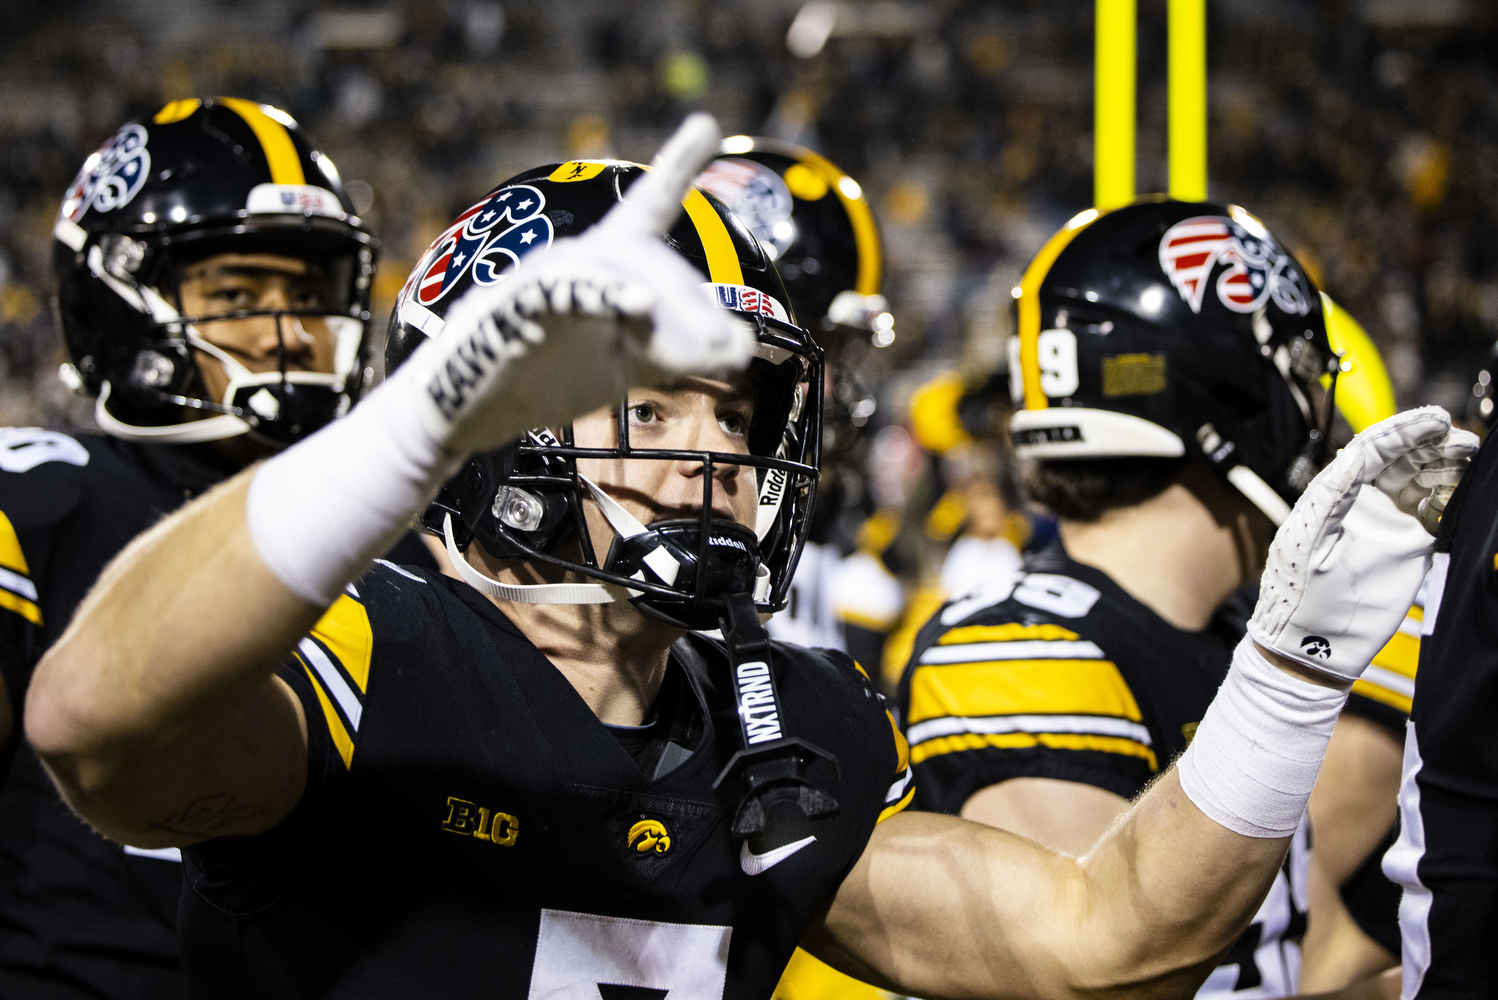 Iowa defensive back Cooper DeJean points to fans after winning a football game between Iowa and Rutgers at Kinnick Stadium on Saturday, Nov. 11, 2023. The Hawkeyes defeated the Scarlet Knights, 22-0.